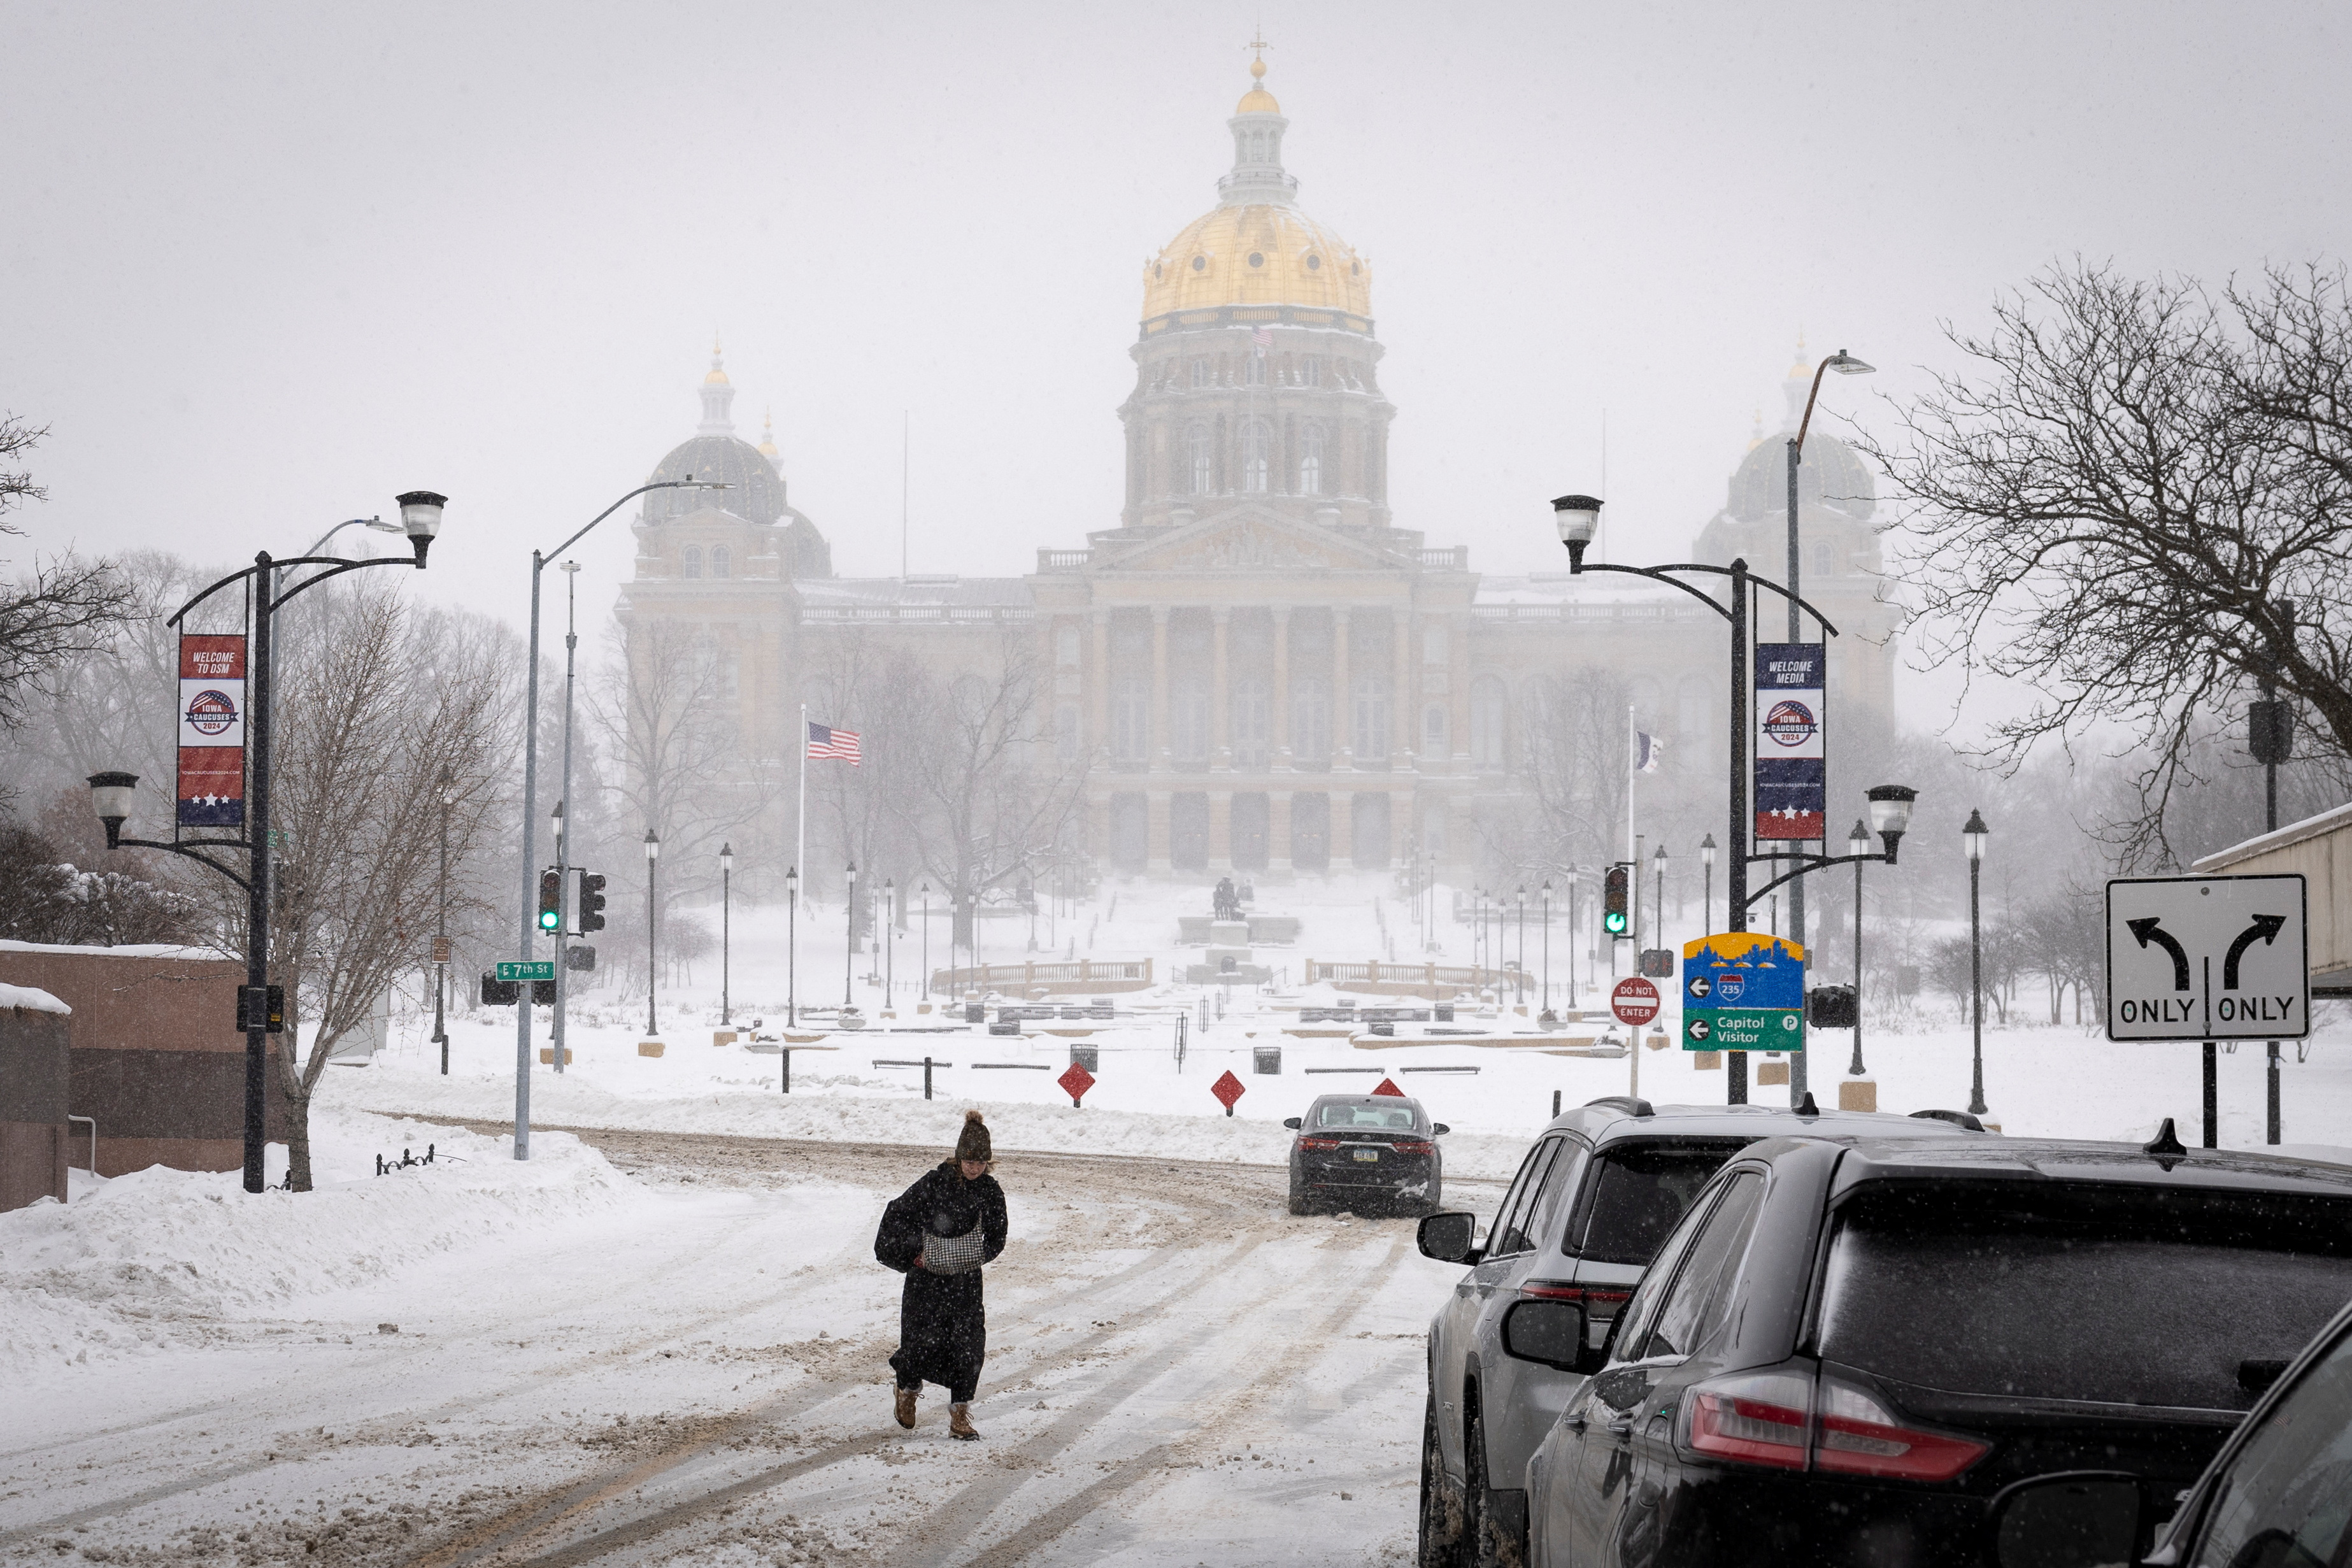 A person walks near the Iowa State Capitol after a blizzard left several inches of snow in Des Moines, Iowa, on January 13.